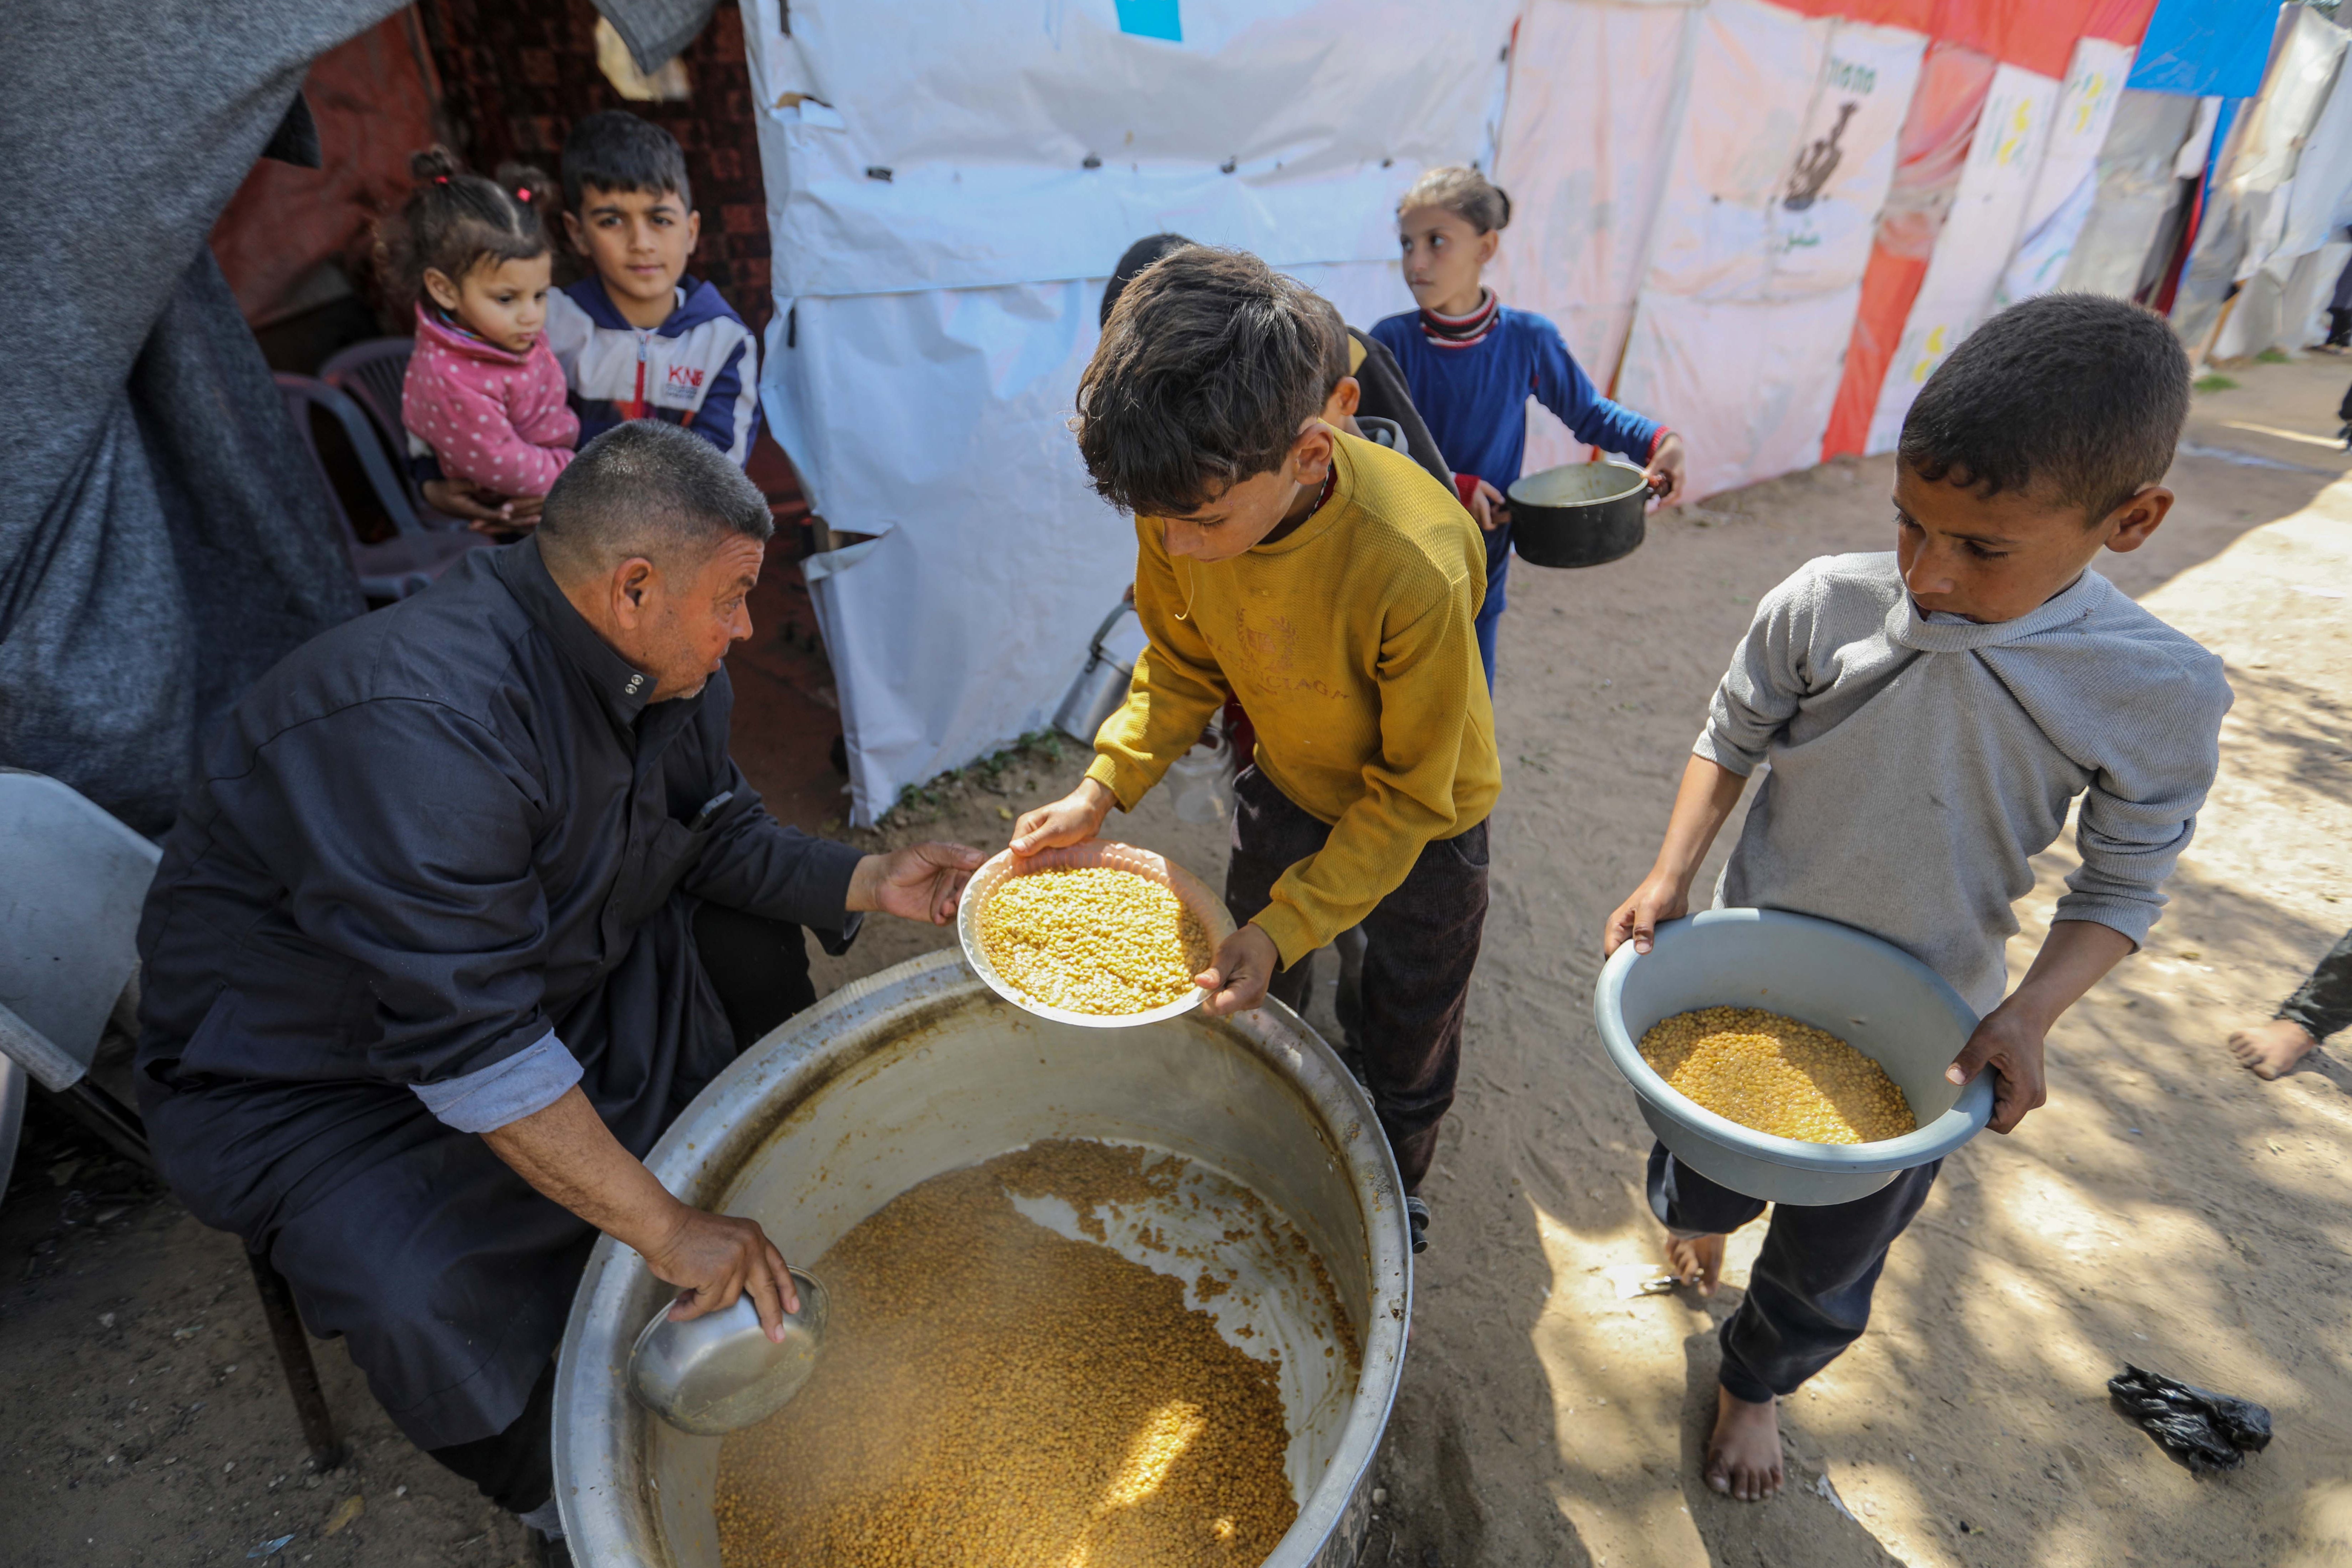 People queue for food that is cooked in large pots and distributed for free in Rafah, southern Gaza